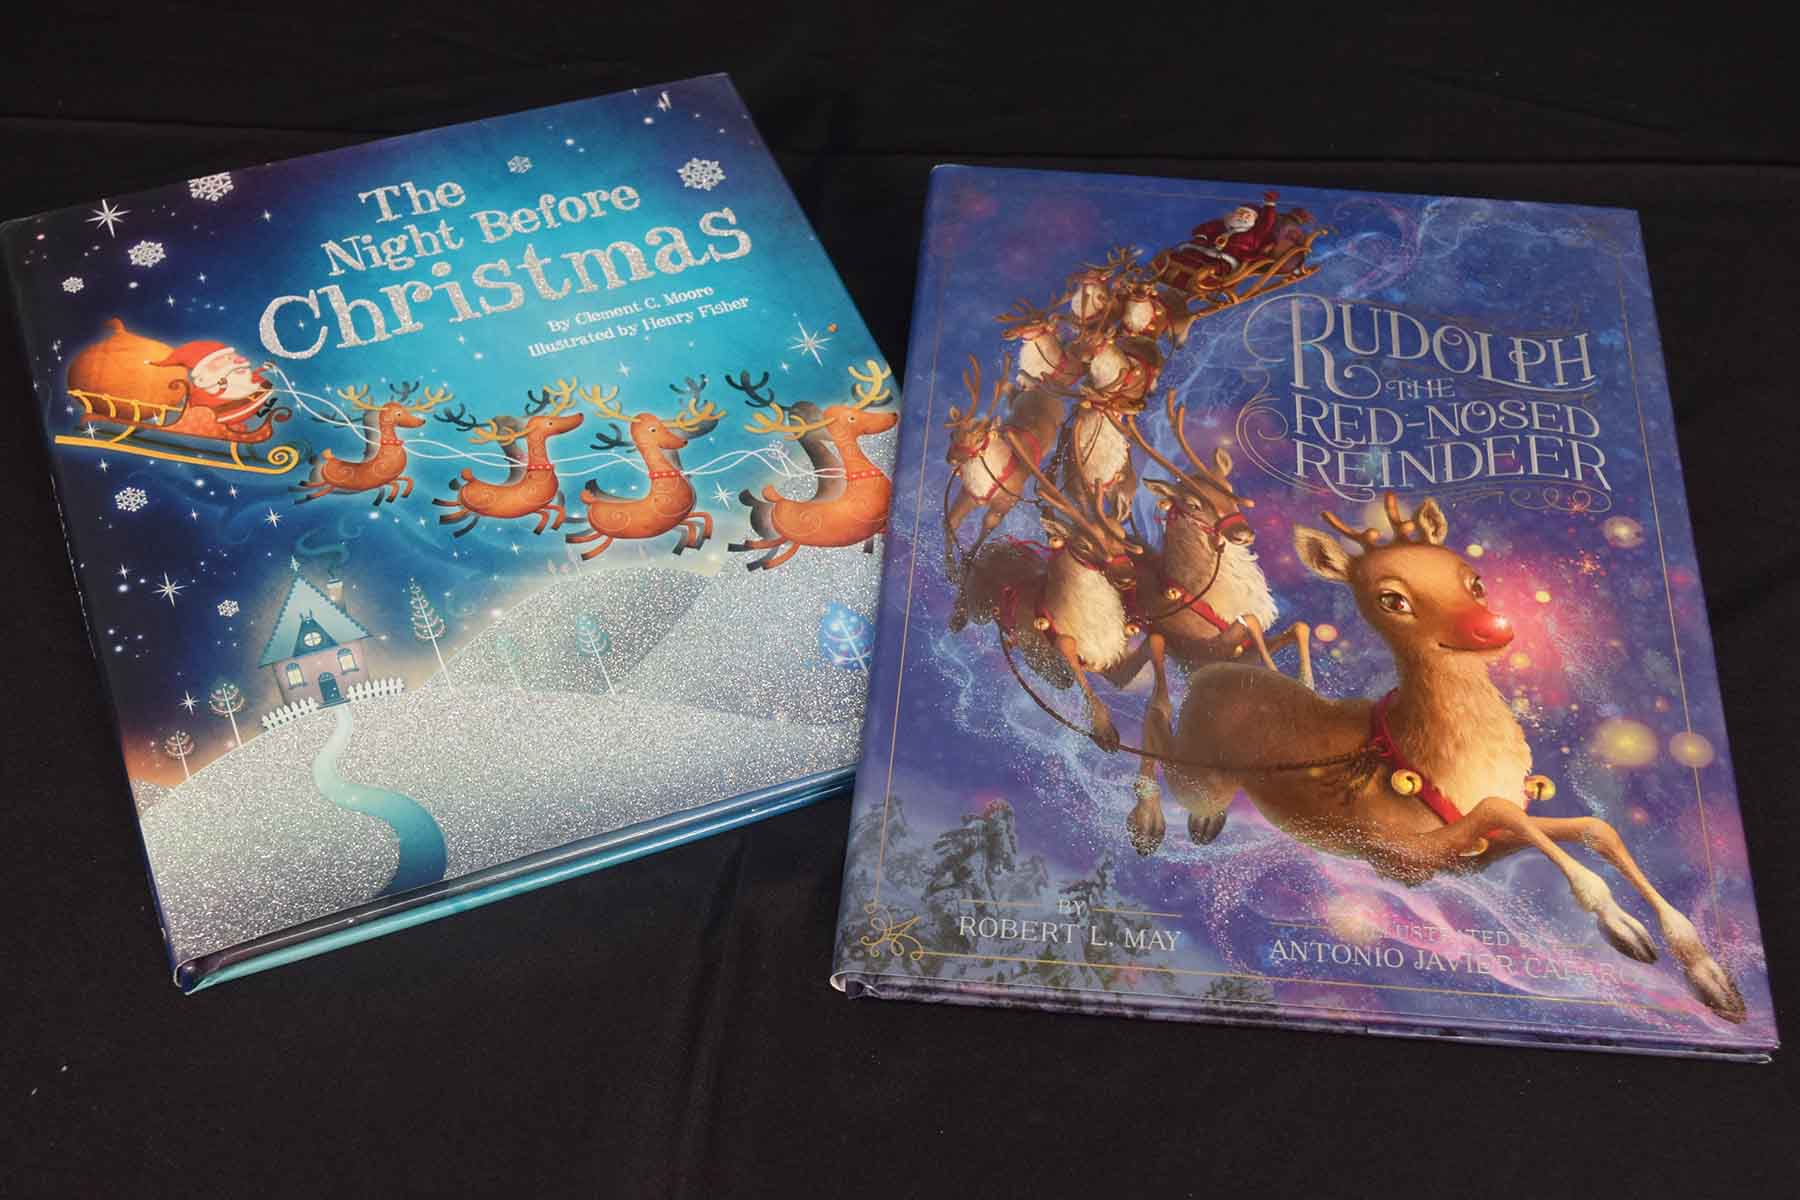 B4_Childrens_books_-_The_Night_before_Christmas_and_Rudolph_the_Red_Nose_Reindeer_ccml-pix_-_[1].jpg